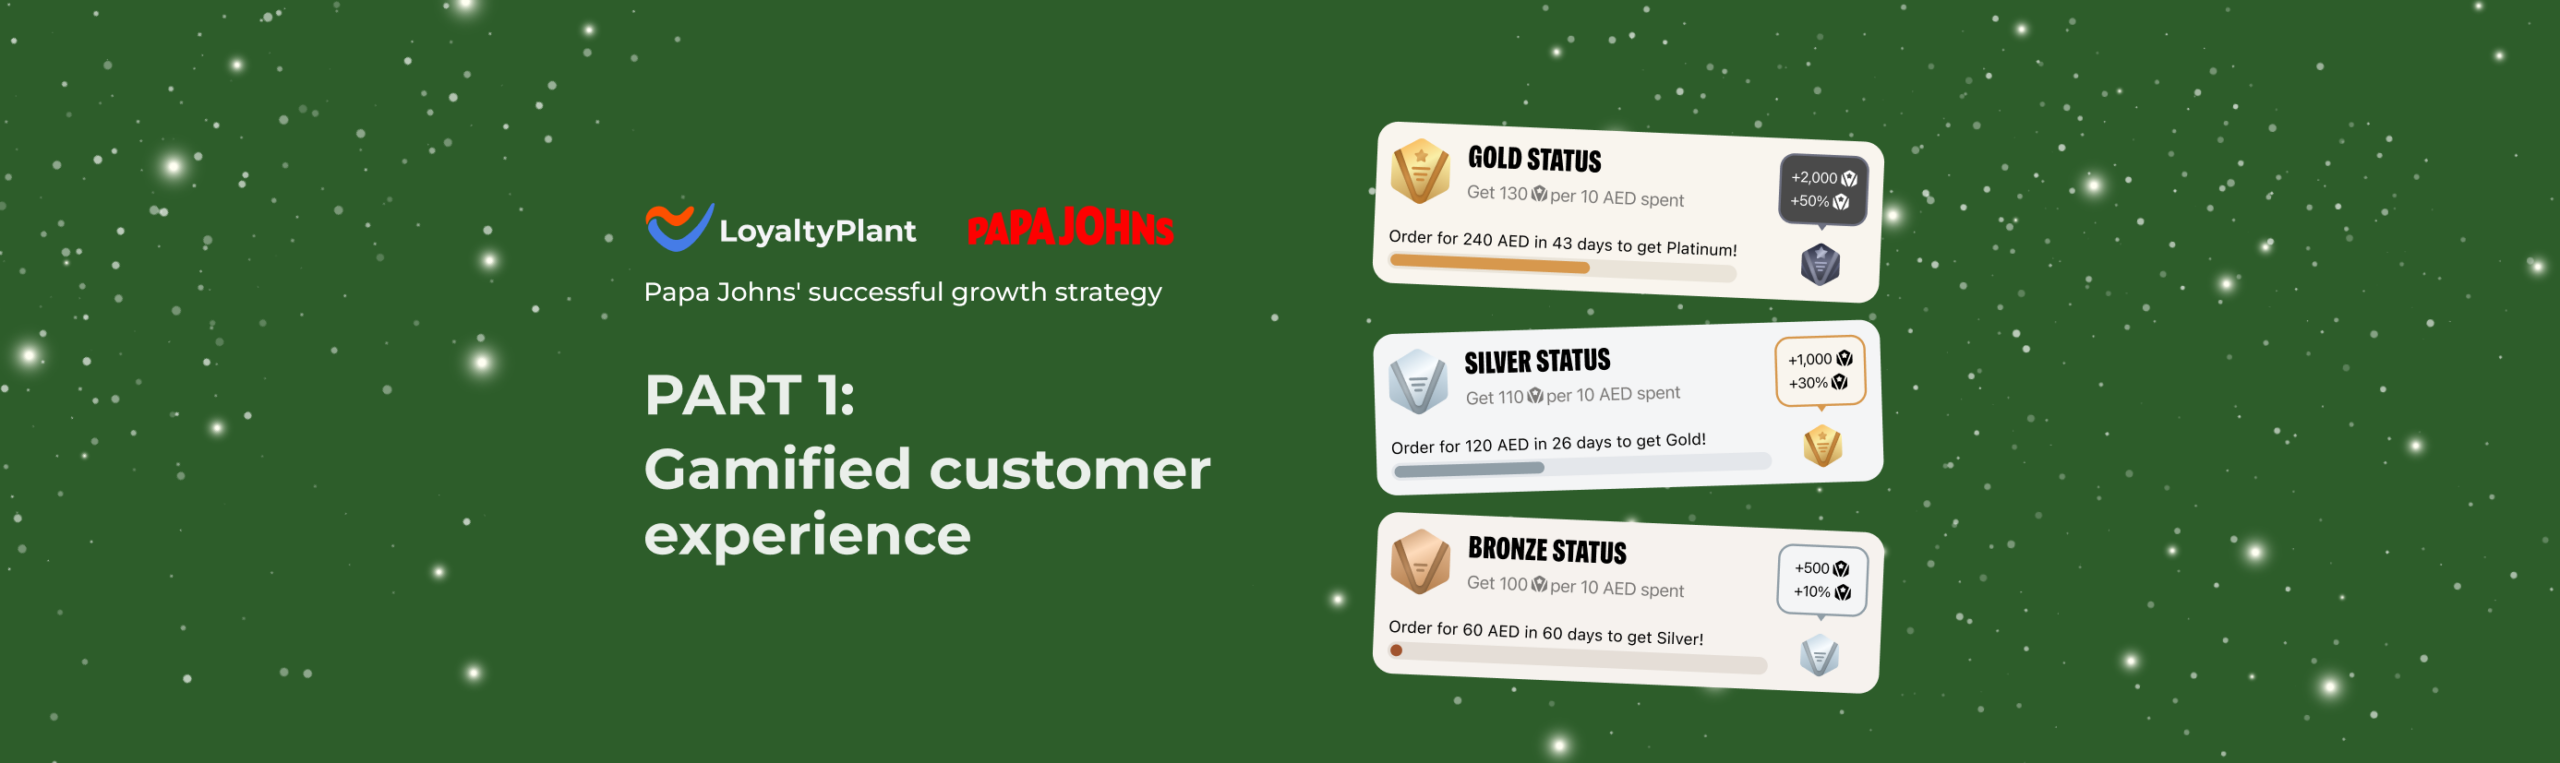 Gamified Customer Experience: Part 1 of Papa Johns’ Successful Growth Strategy